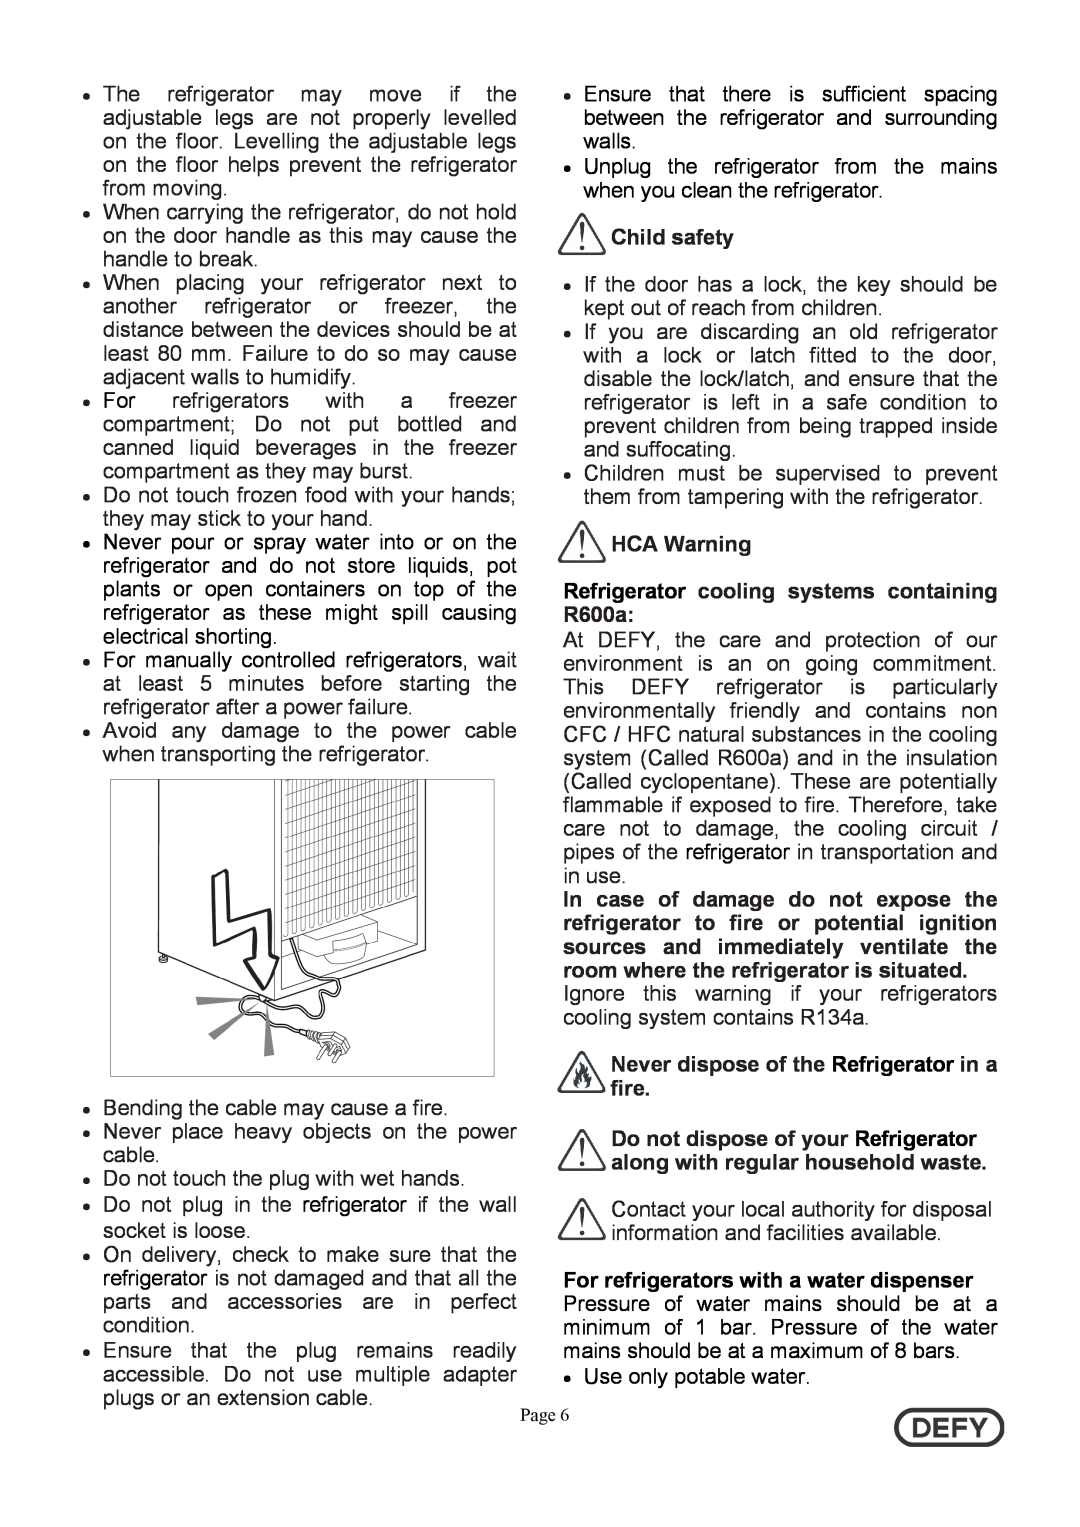 Defy Appliances DFC402 instruction manual Child safety, HCA Warning Refrigerator cooling systems containing R600a 